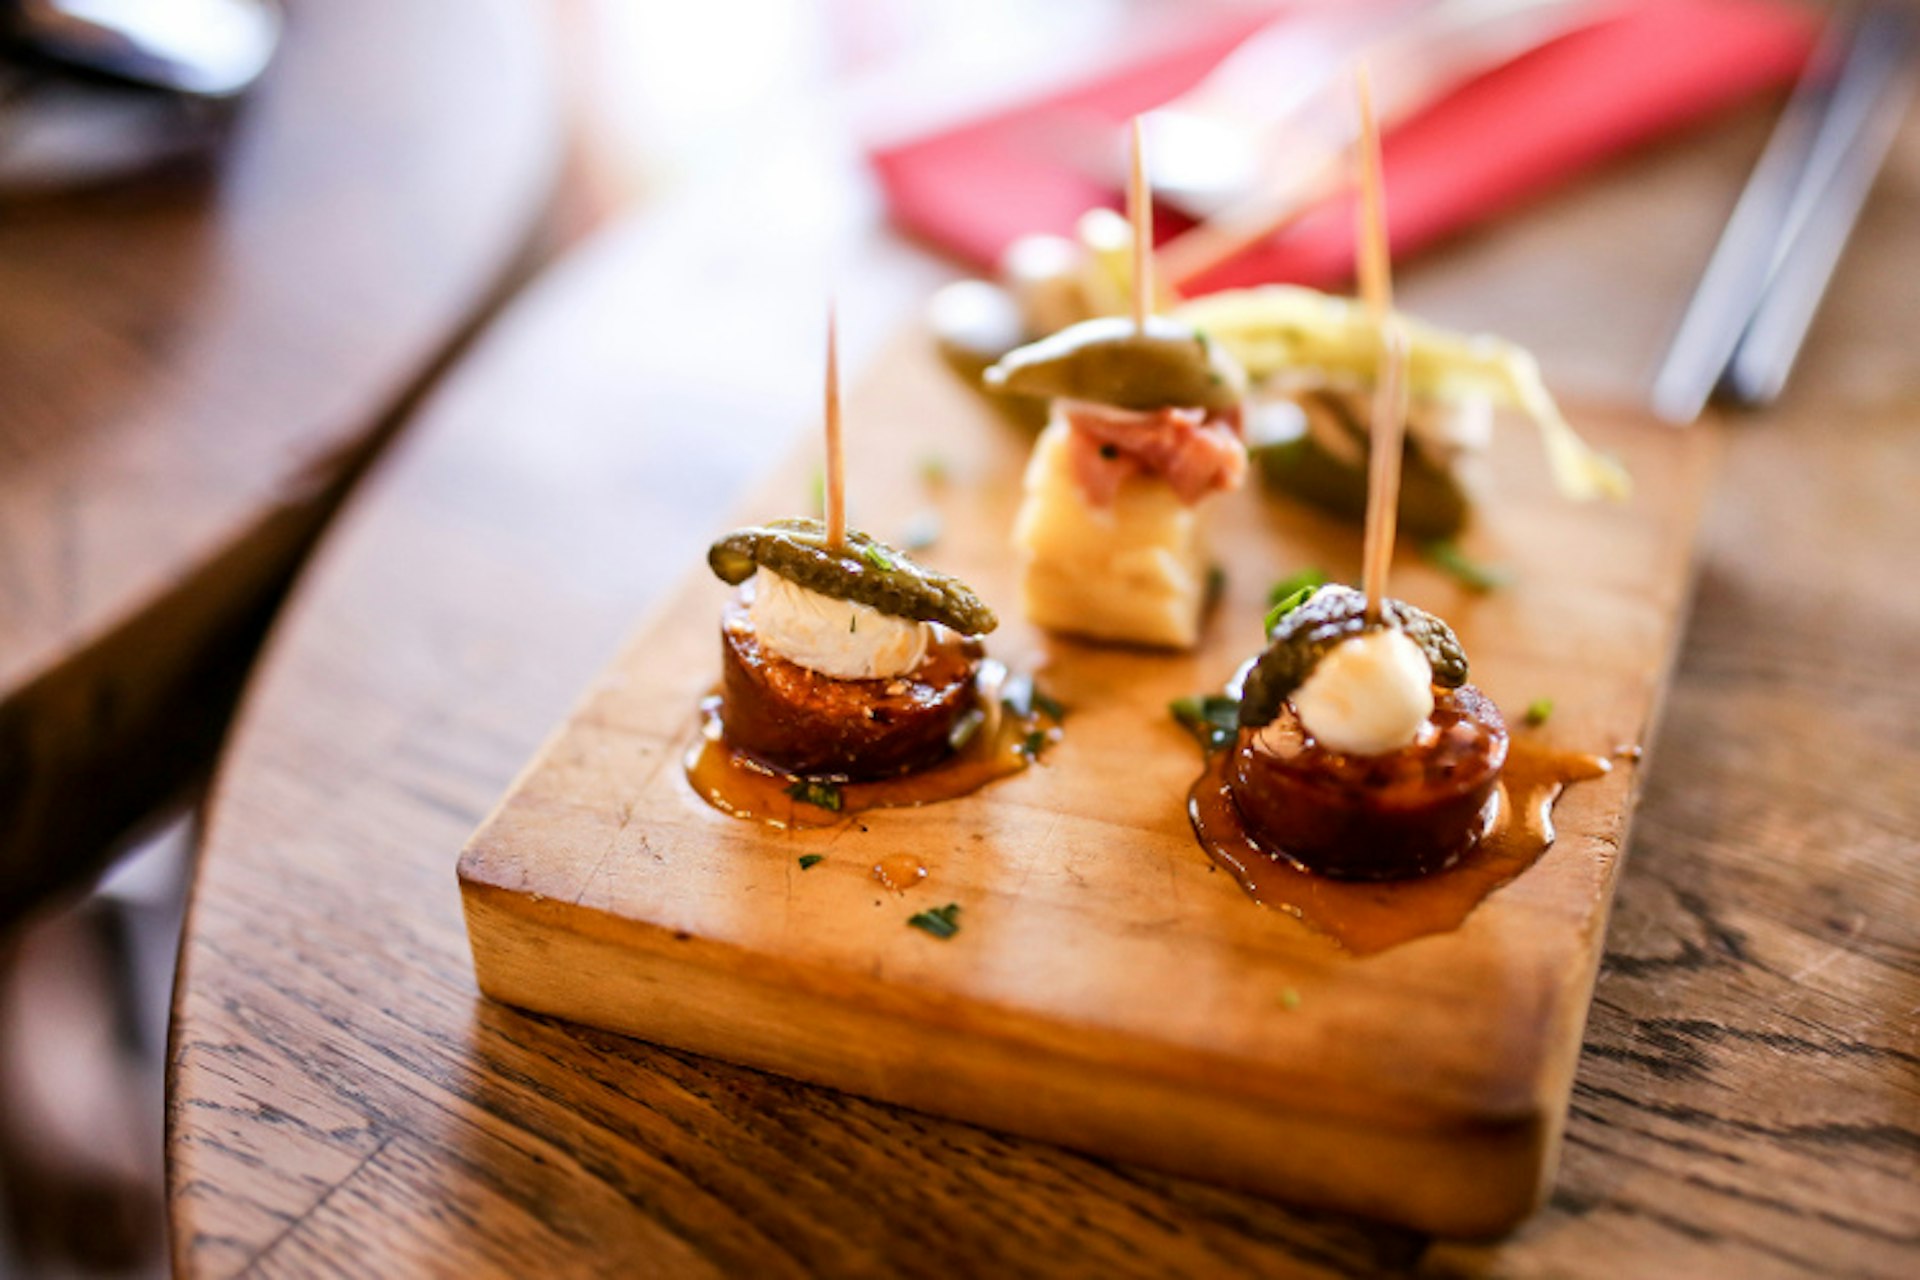 Tapas meal in Perth / Image by Terence Lim / CC BY ND 2.0